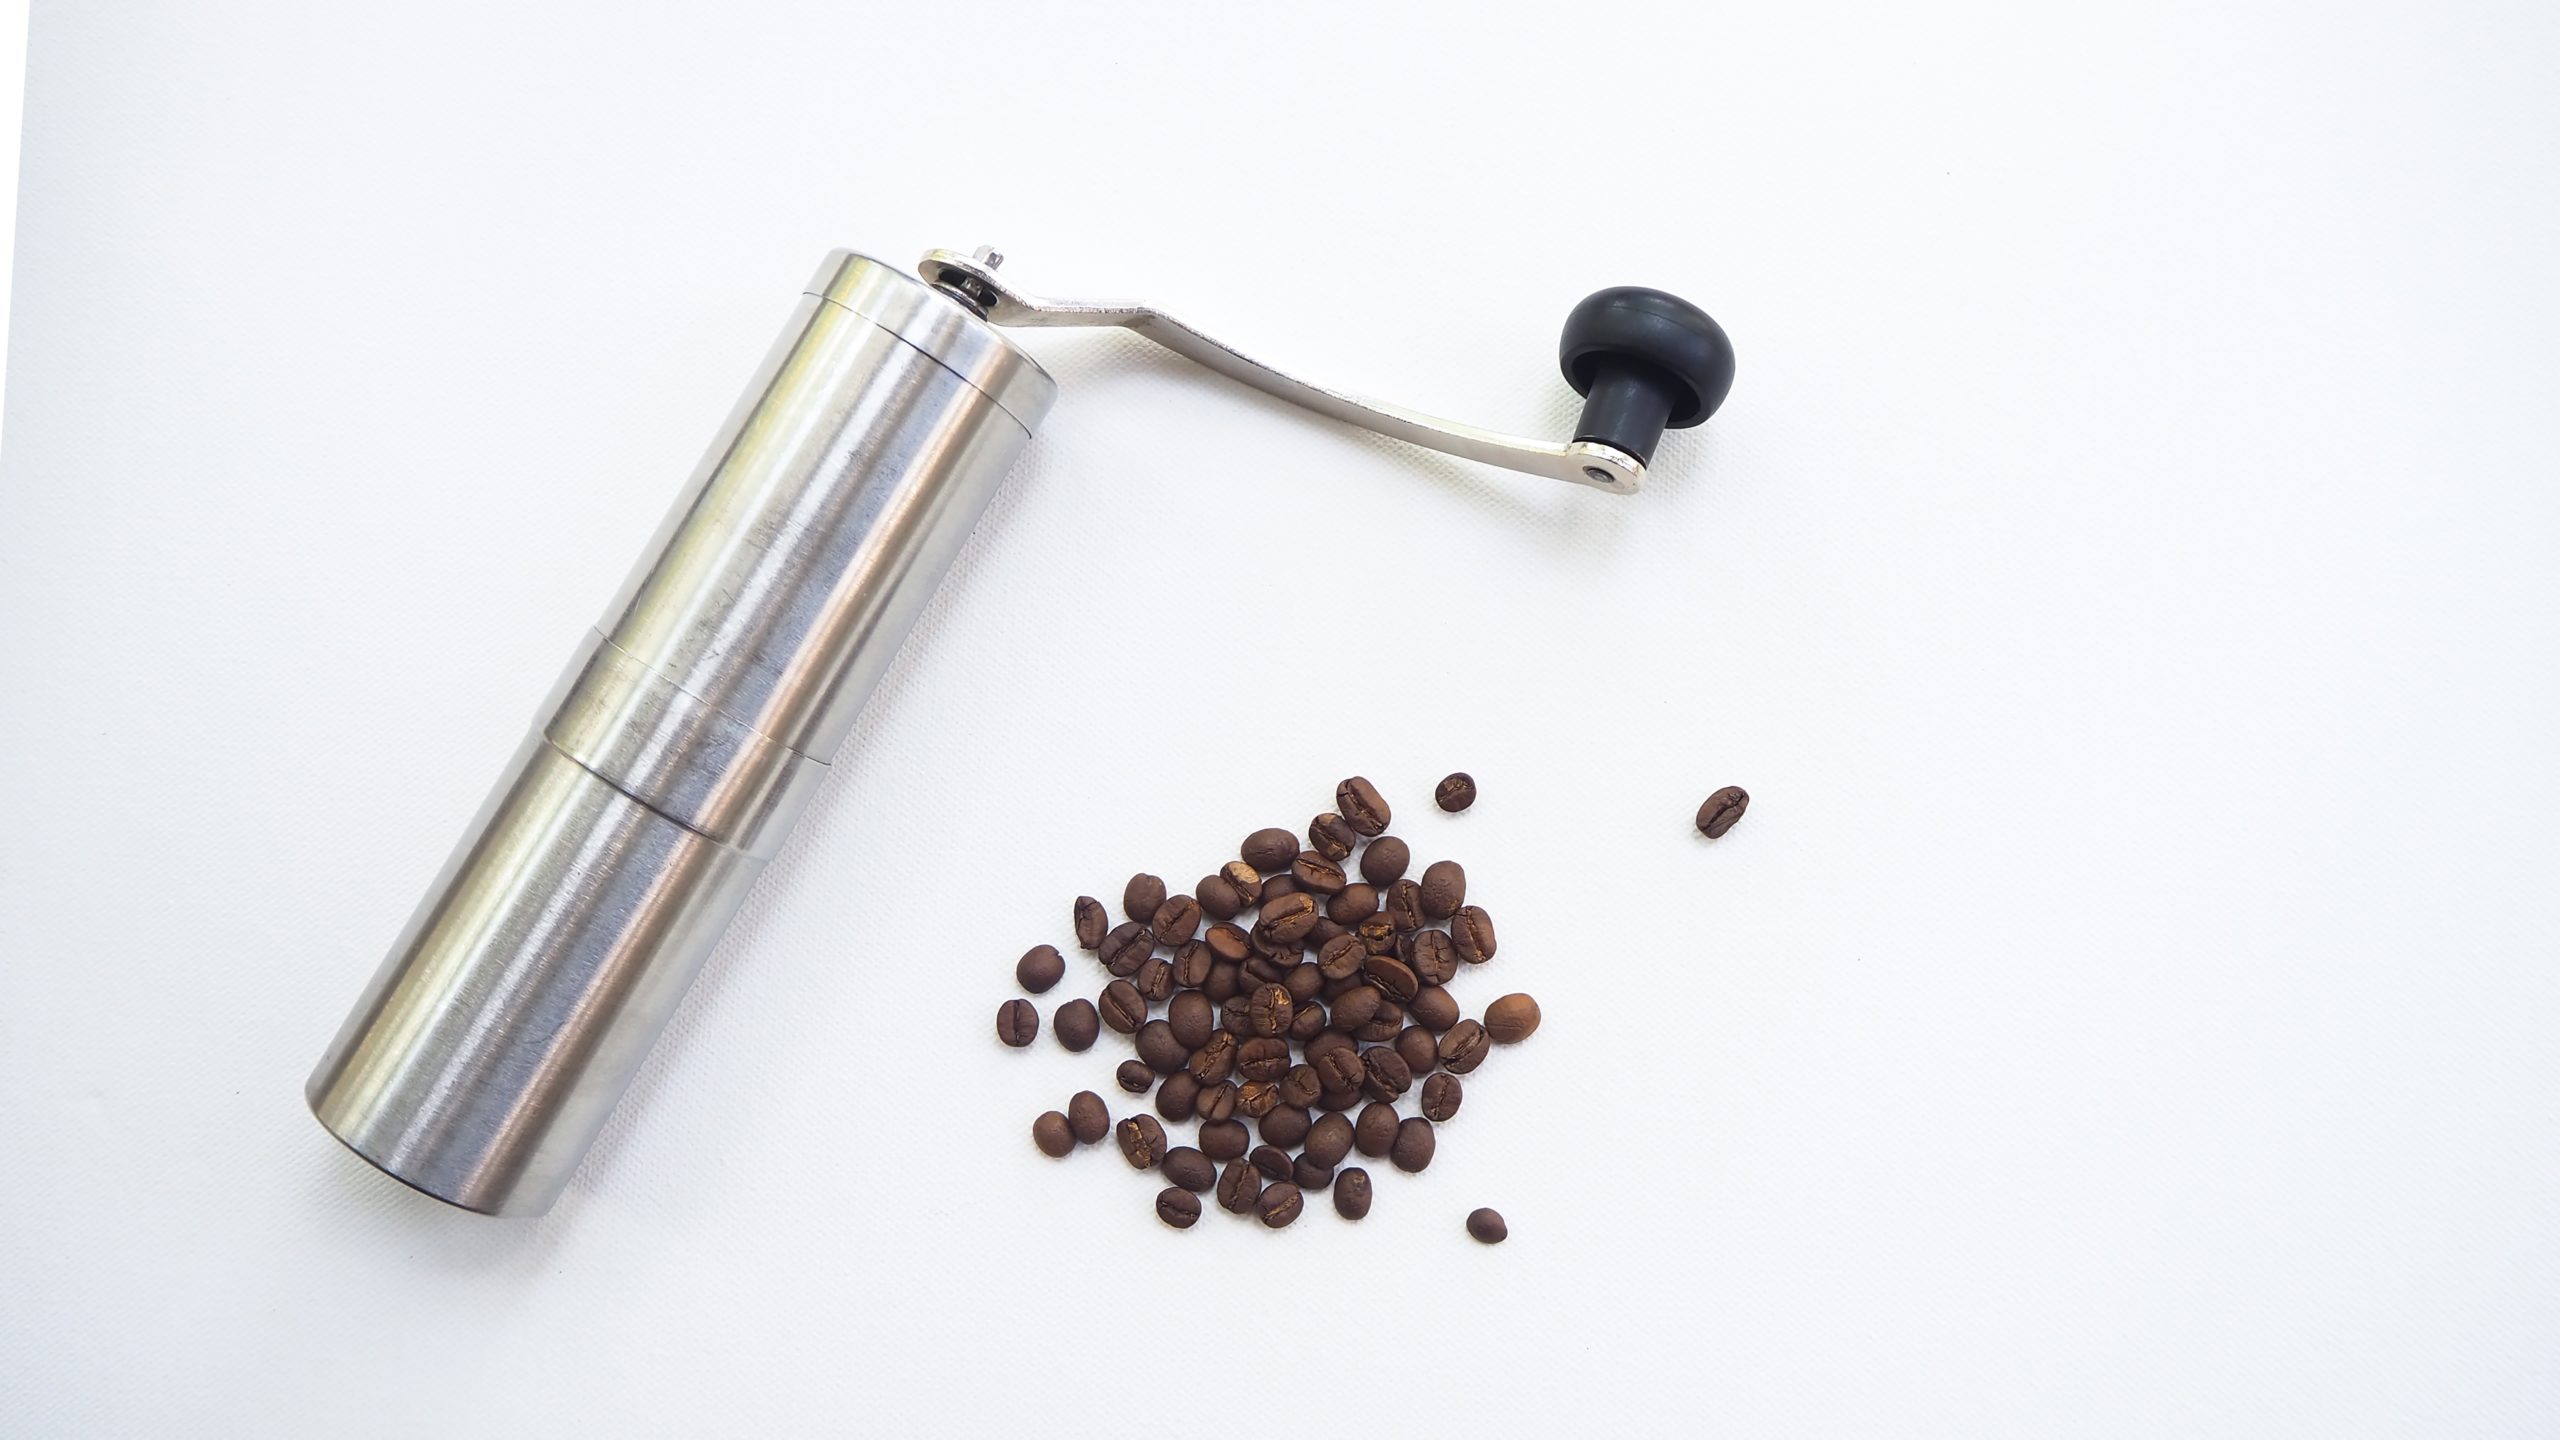 This ultimate guide covers the finest coffee grinder you can purchase in 2019. We have tested each coffee grinder mentioned in this article and compared their size, price, speed, and performance. We bring to you everything you need to know before you purchase your next brewing companion and also tested grinders that experts consider to be the best in world if you want to skip on a grind and brew coffee maker.